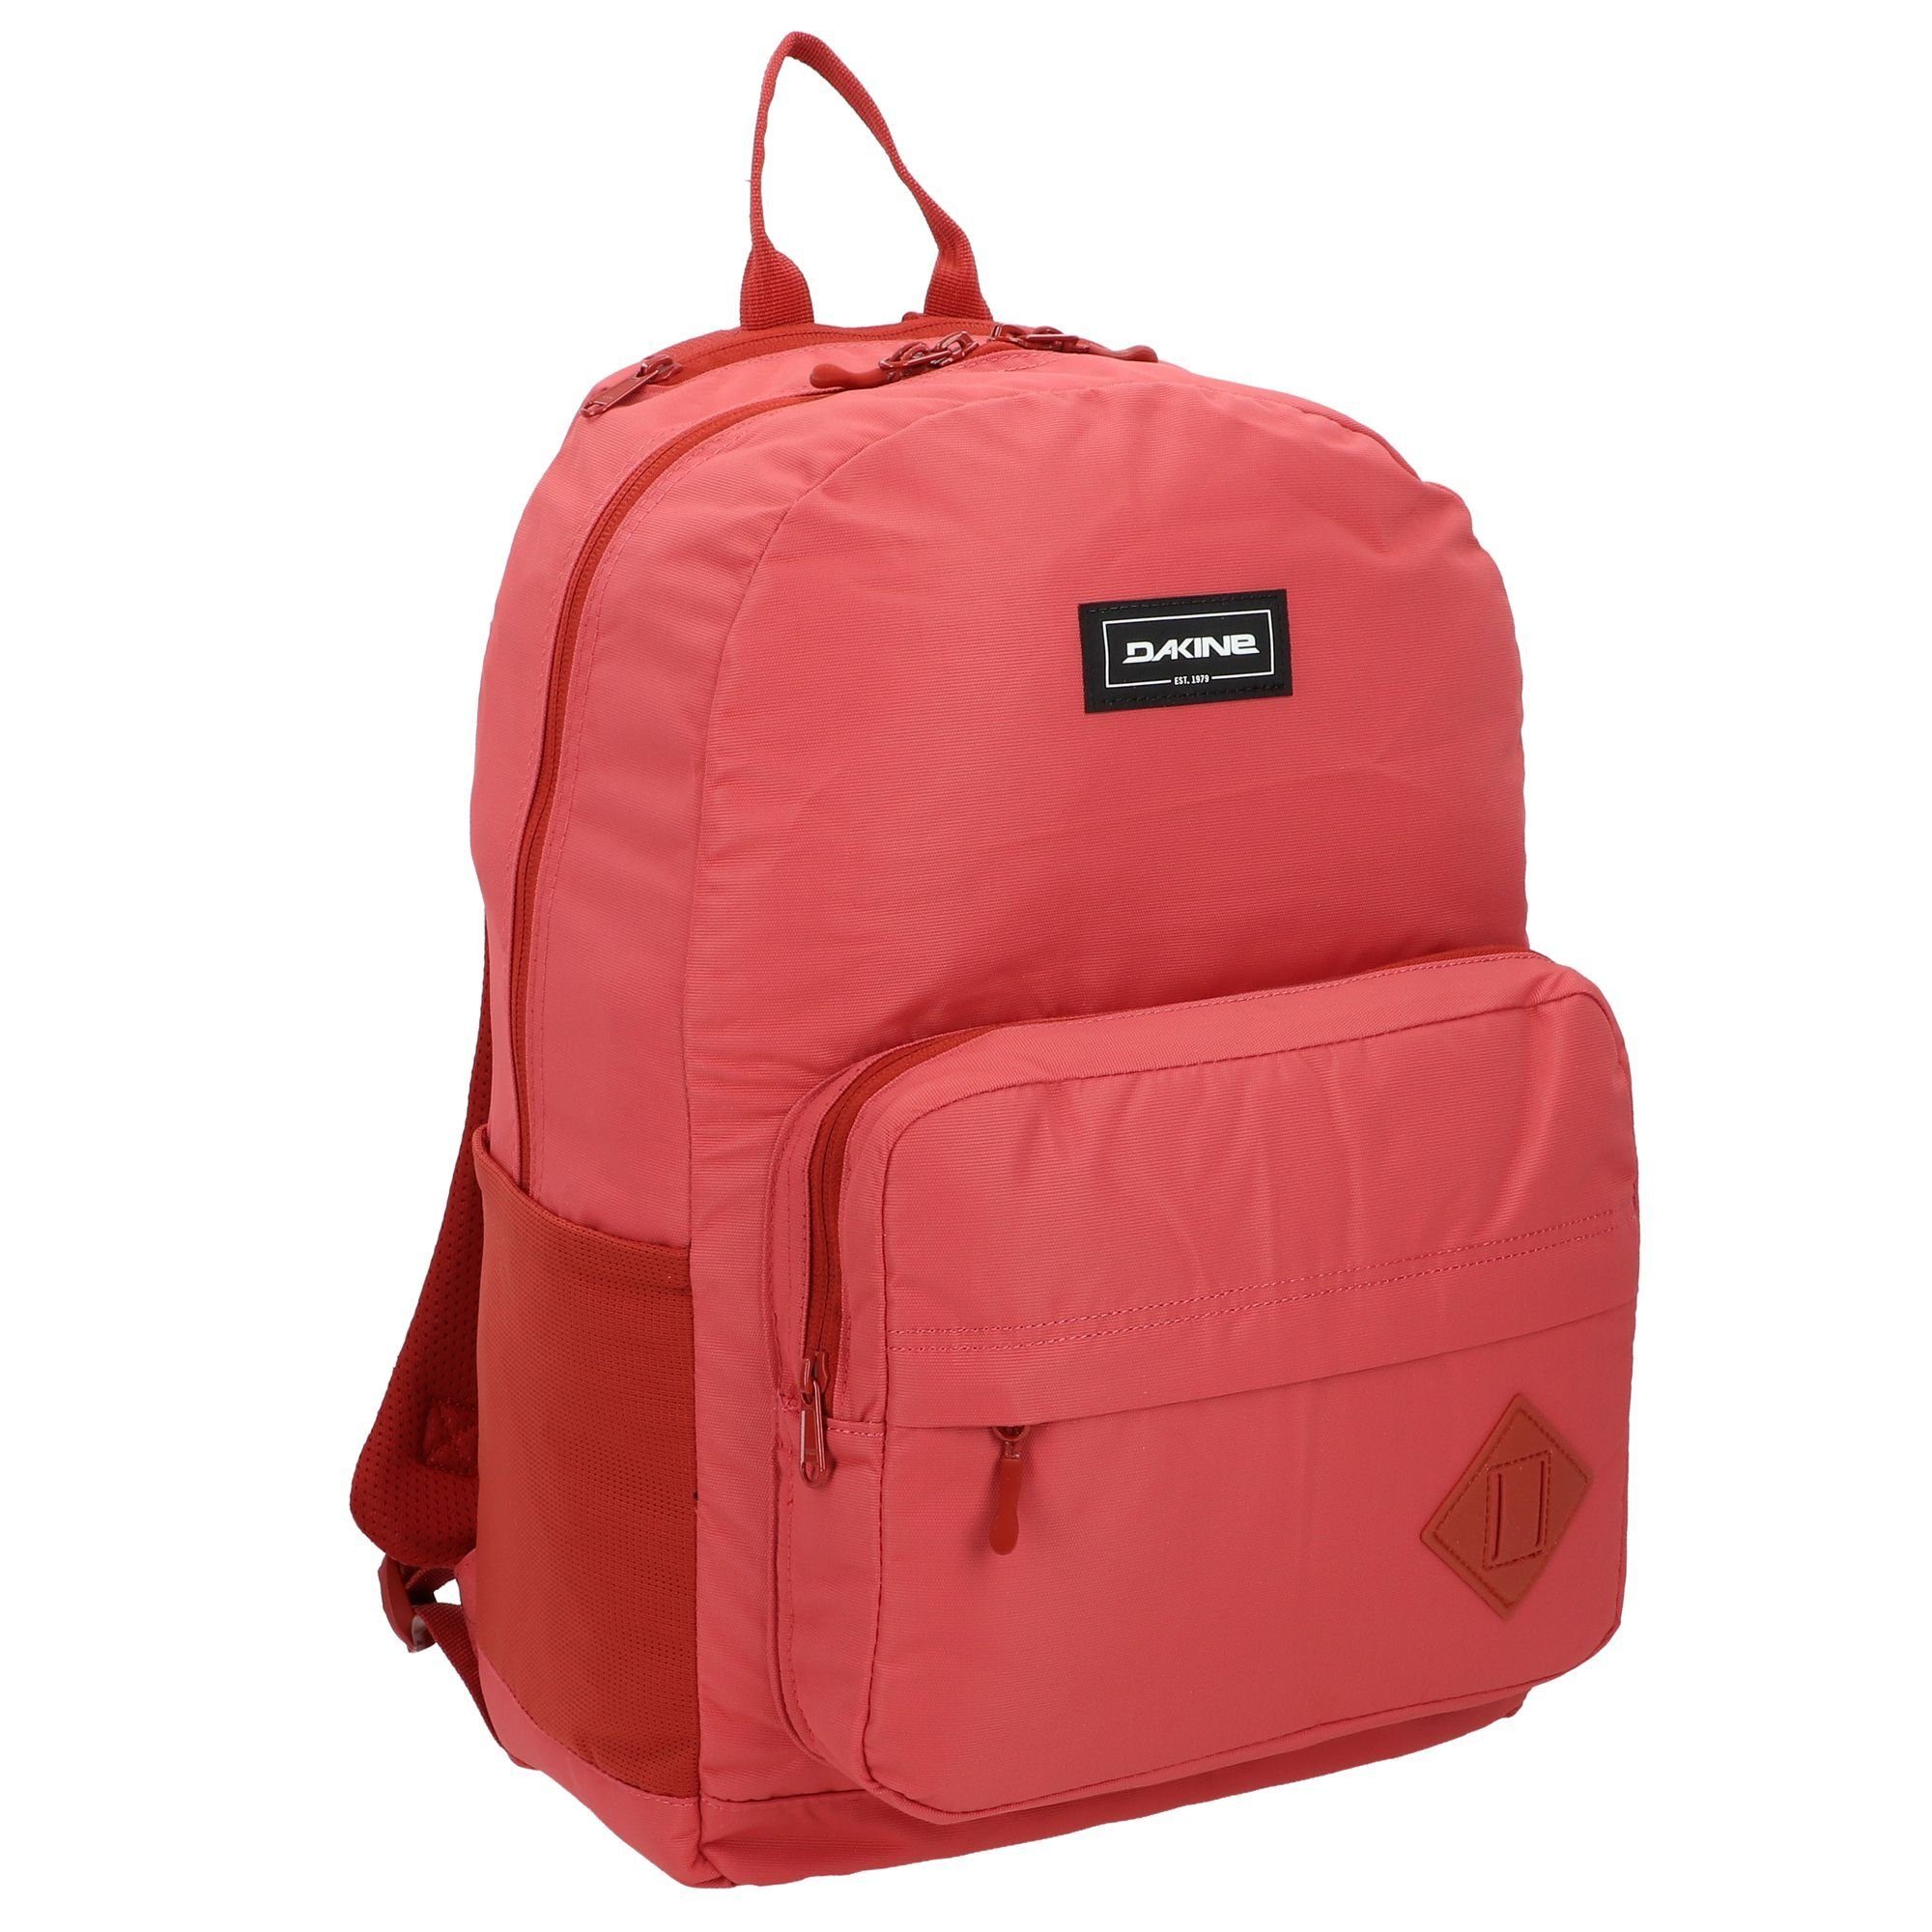 Polyester 365 mineral red PACK, Dakine Daypack